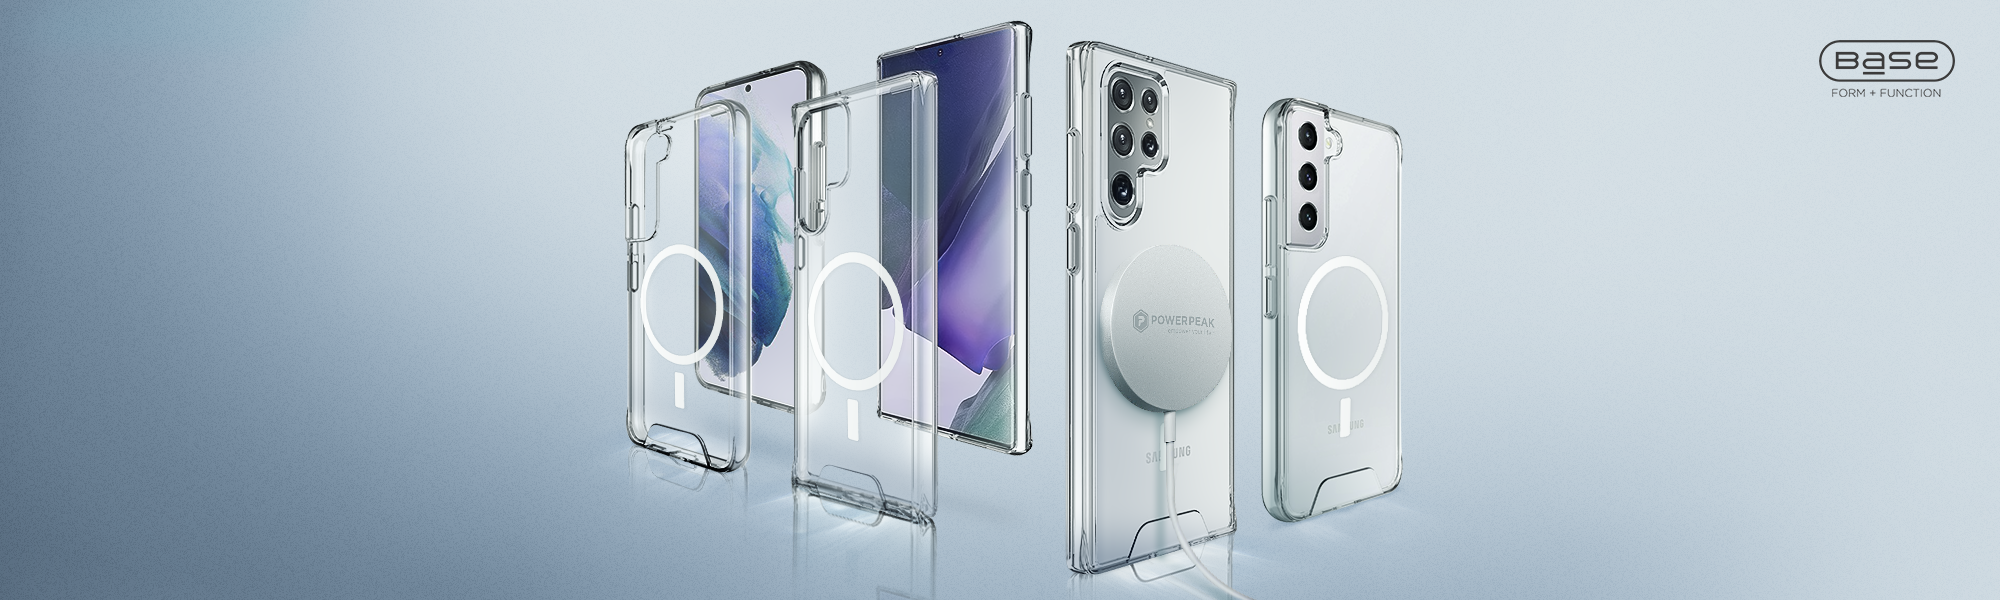 Samsung s22 phones with clear cases